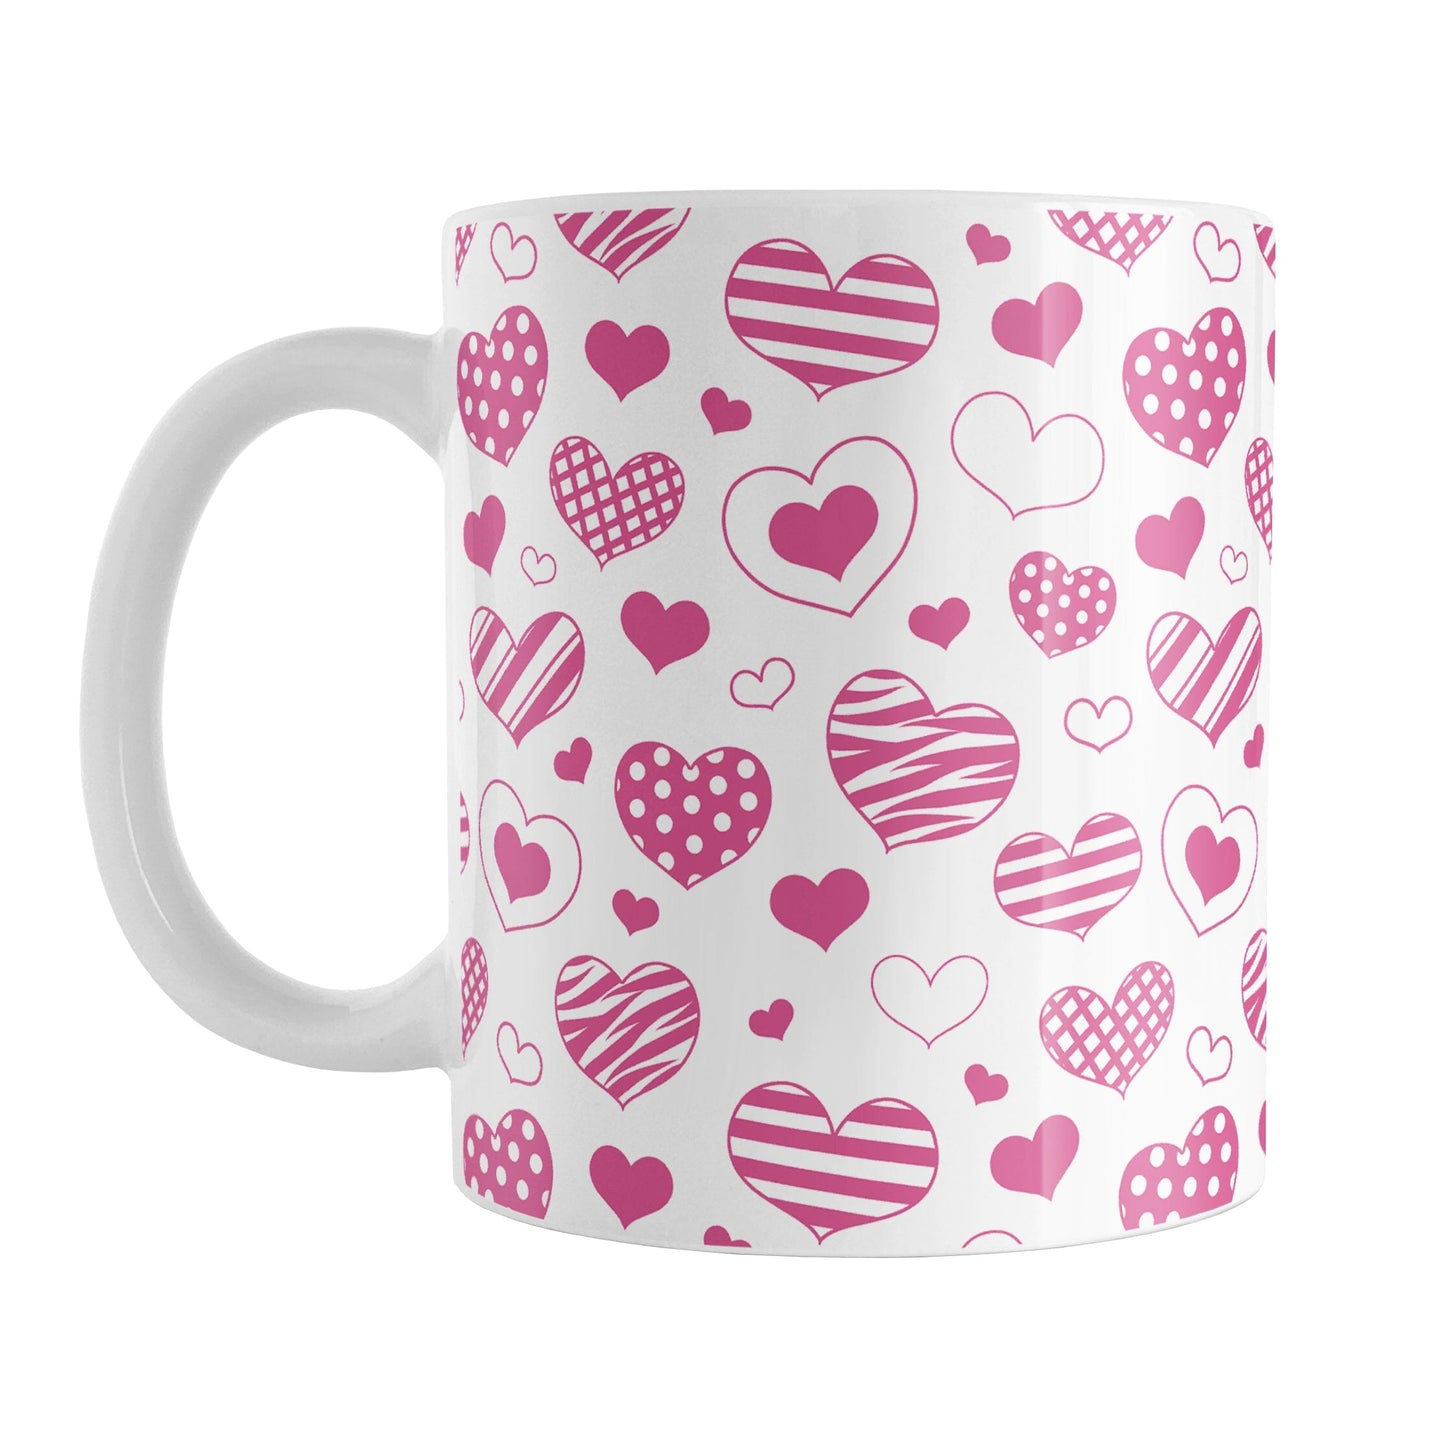 Pink Heart Doodles Mug (11oz) at Amy's Coffee Mugs. A ceramic coffee mug designed with hand-drawn pink heart doodles in a pattern that wraps around the cup. This cute heart pattern is perfect for Valentine's Day or for anyone who loves hearts and young-at-heart drawings. 